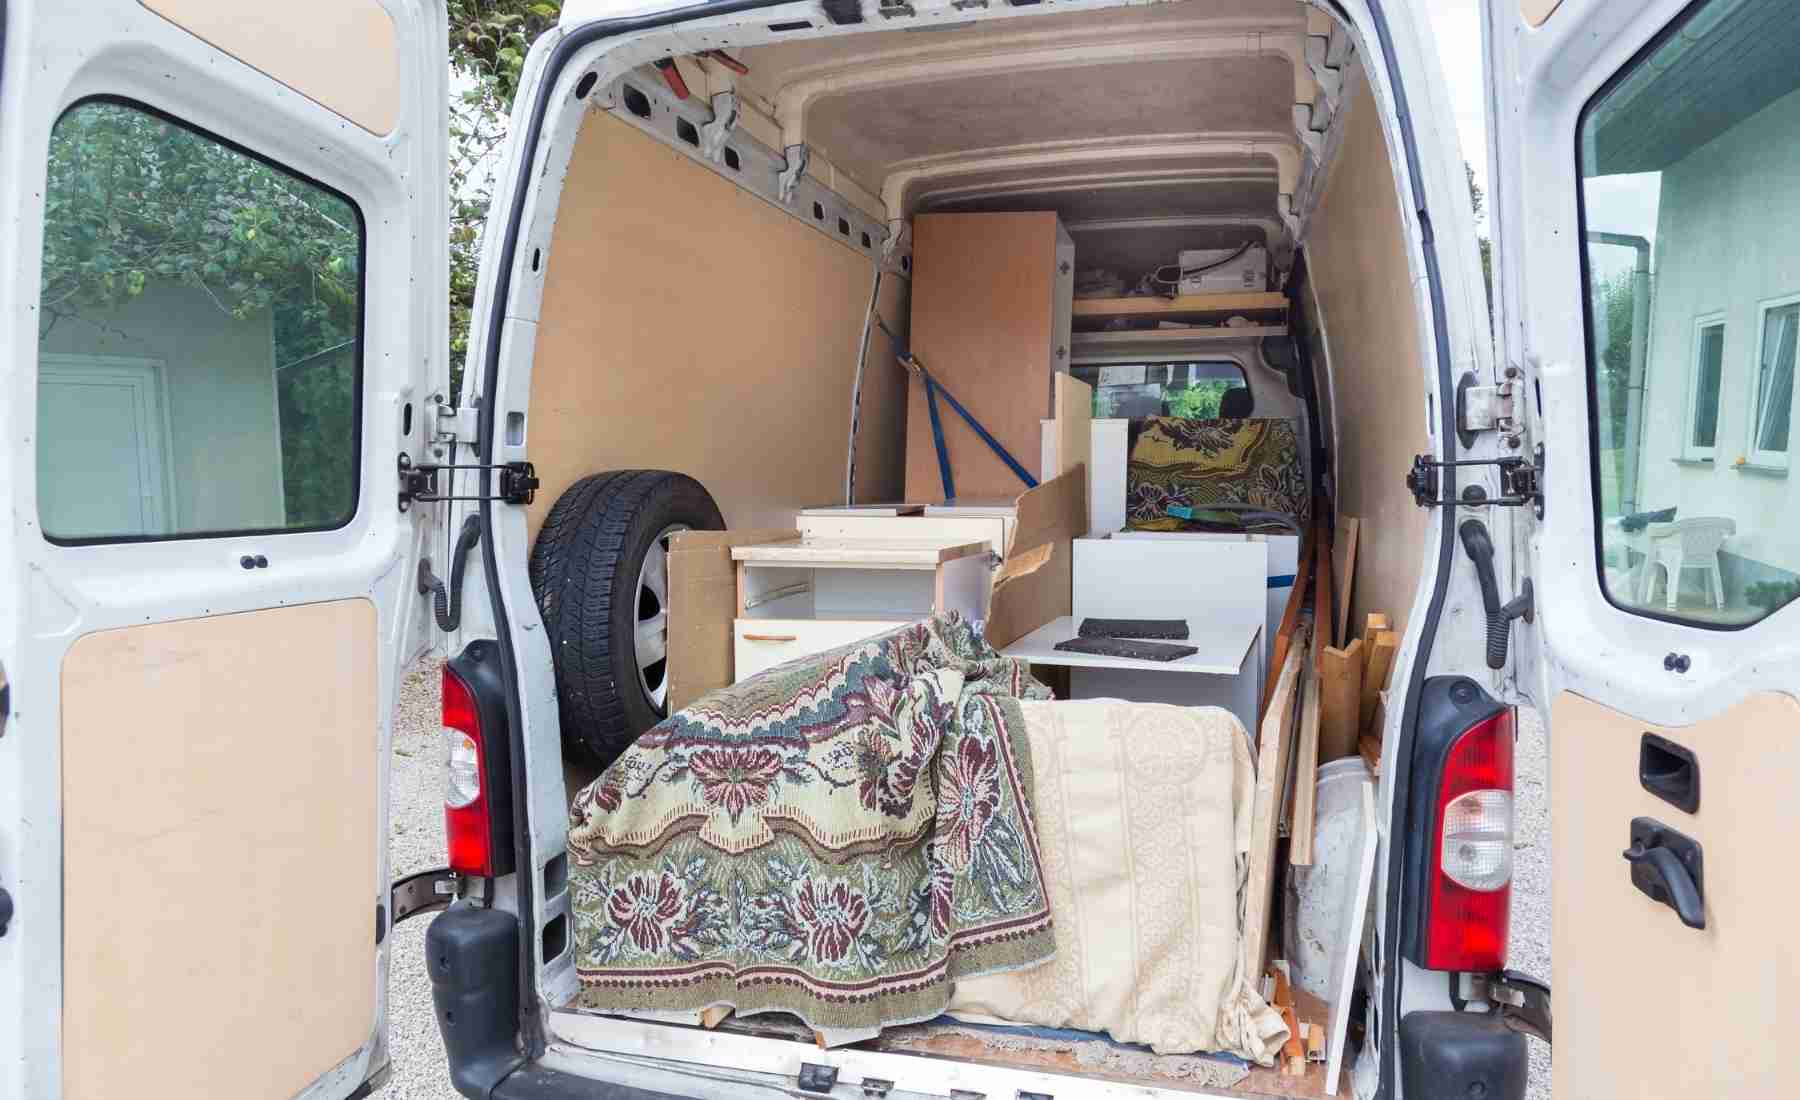 Moving Company with Van